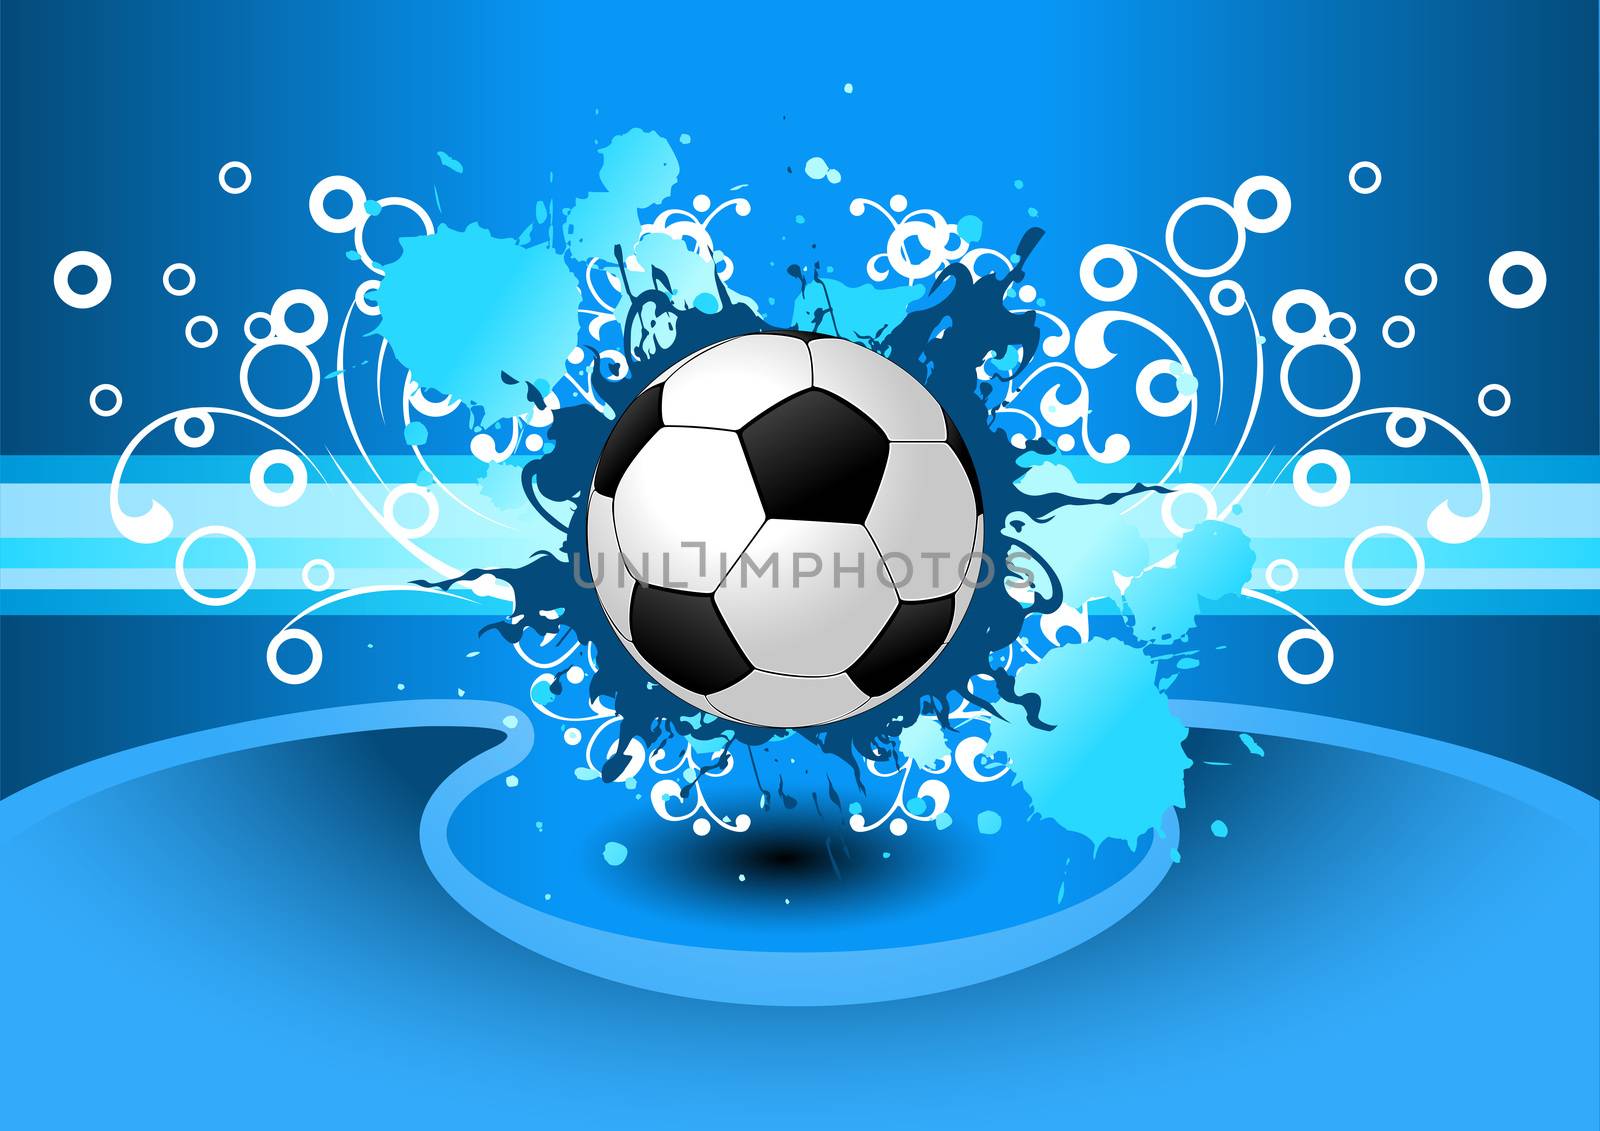 Grunge Soccer background by WaD